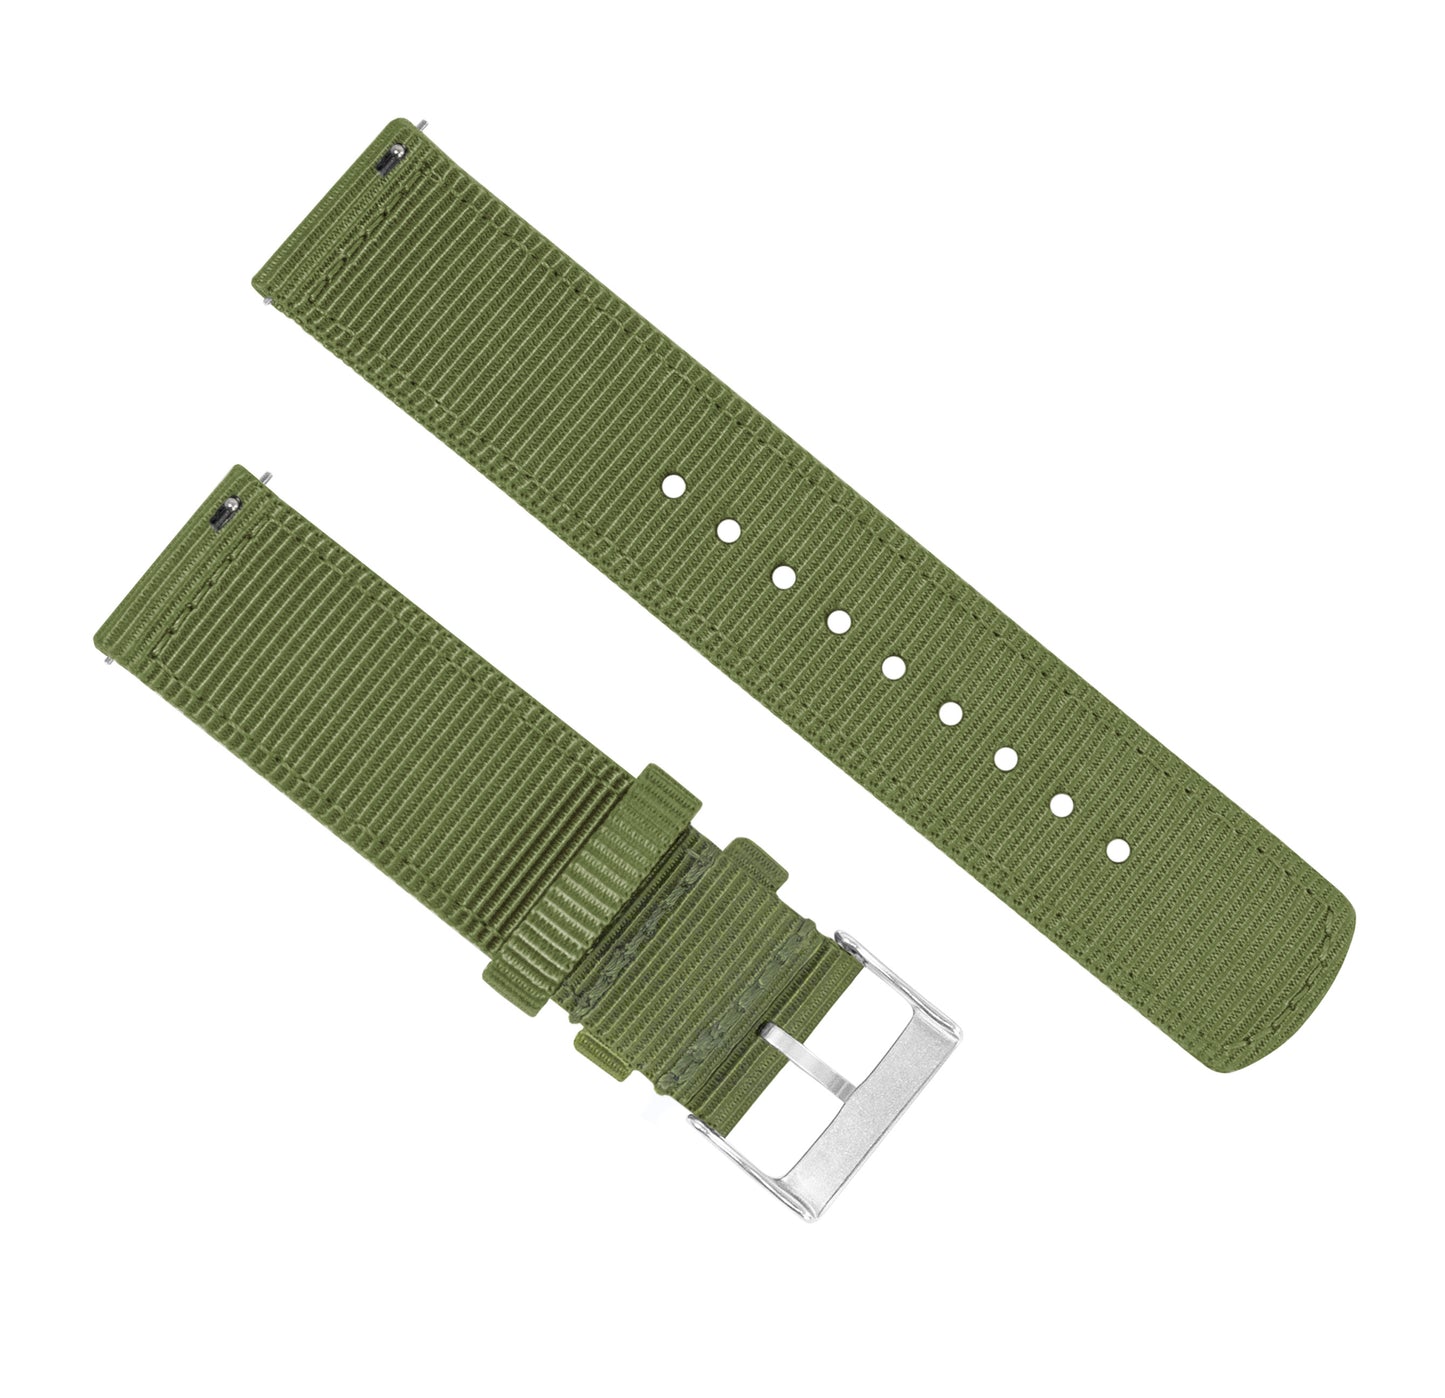 Fossil Sport | Two-Piece NATO Style | Army Green - Barton Watch Bands